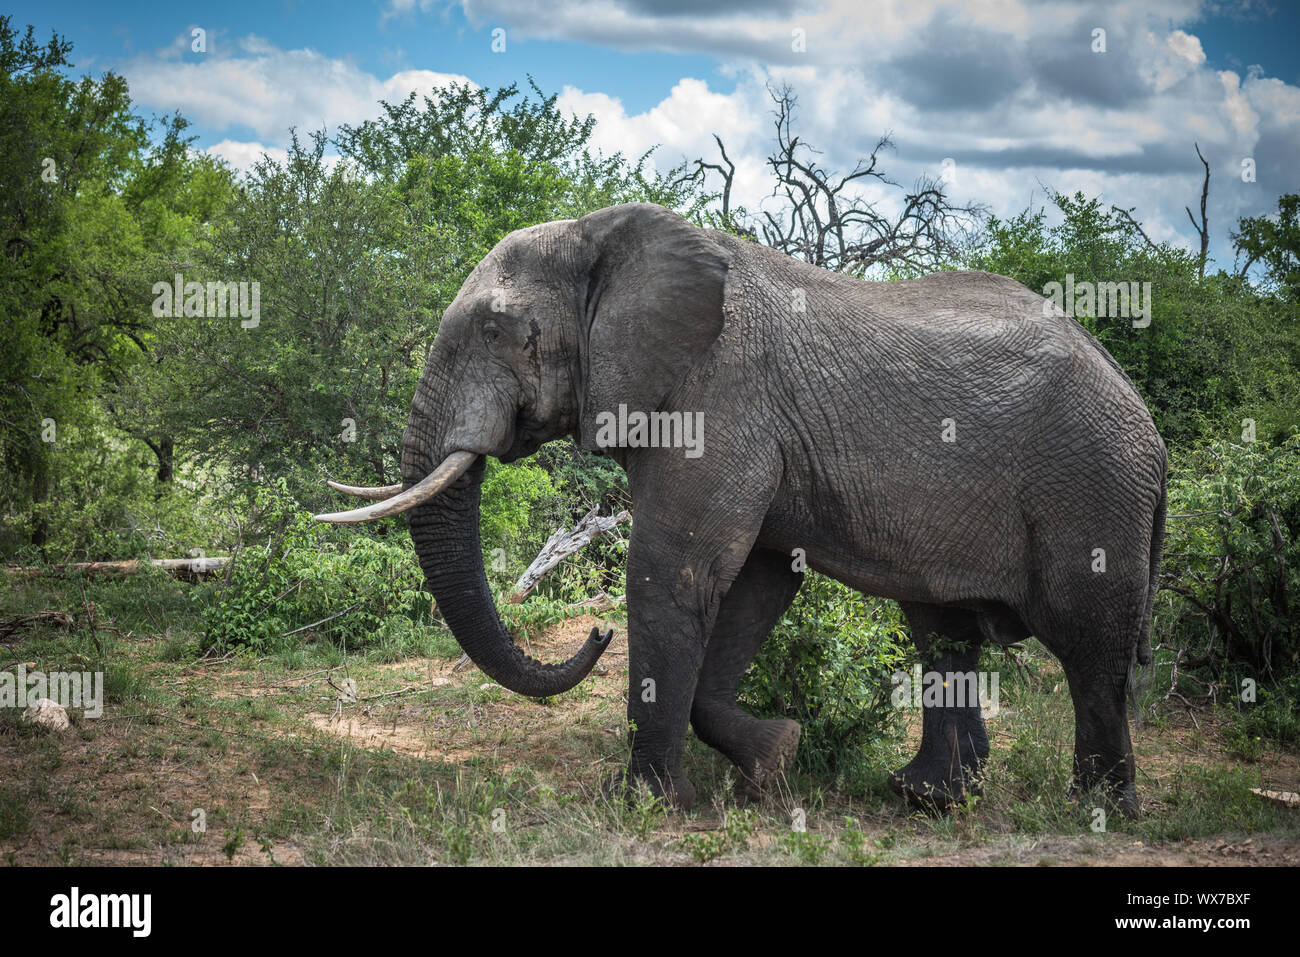 Elephant in Kruger National Park, South Africa. Stock Photo